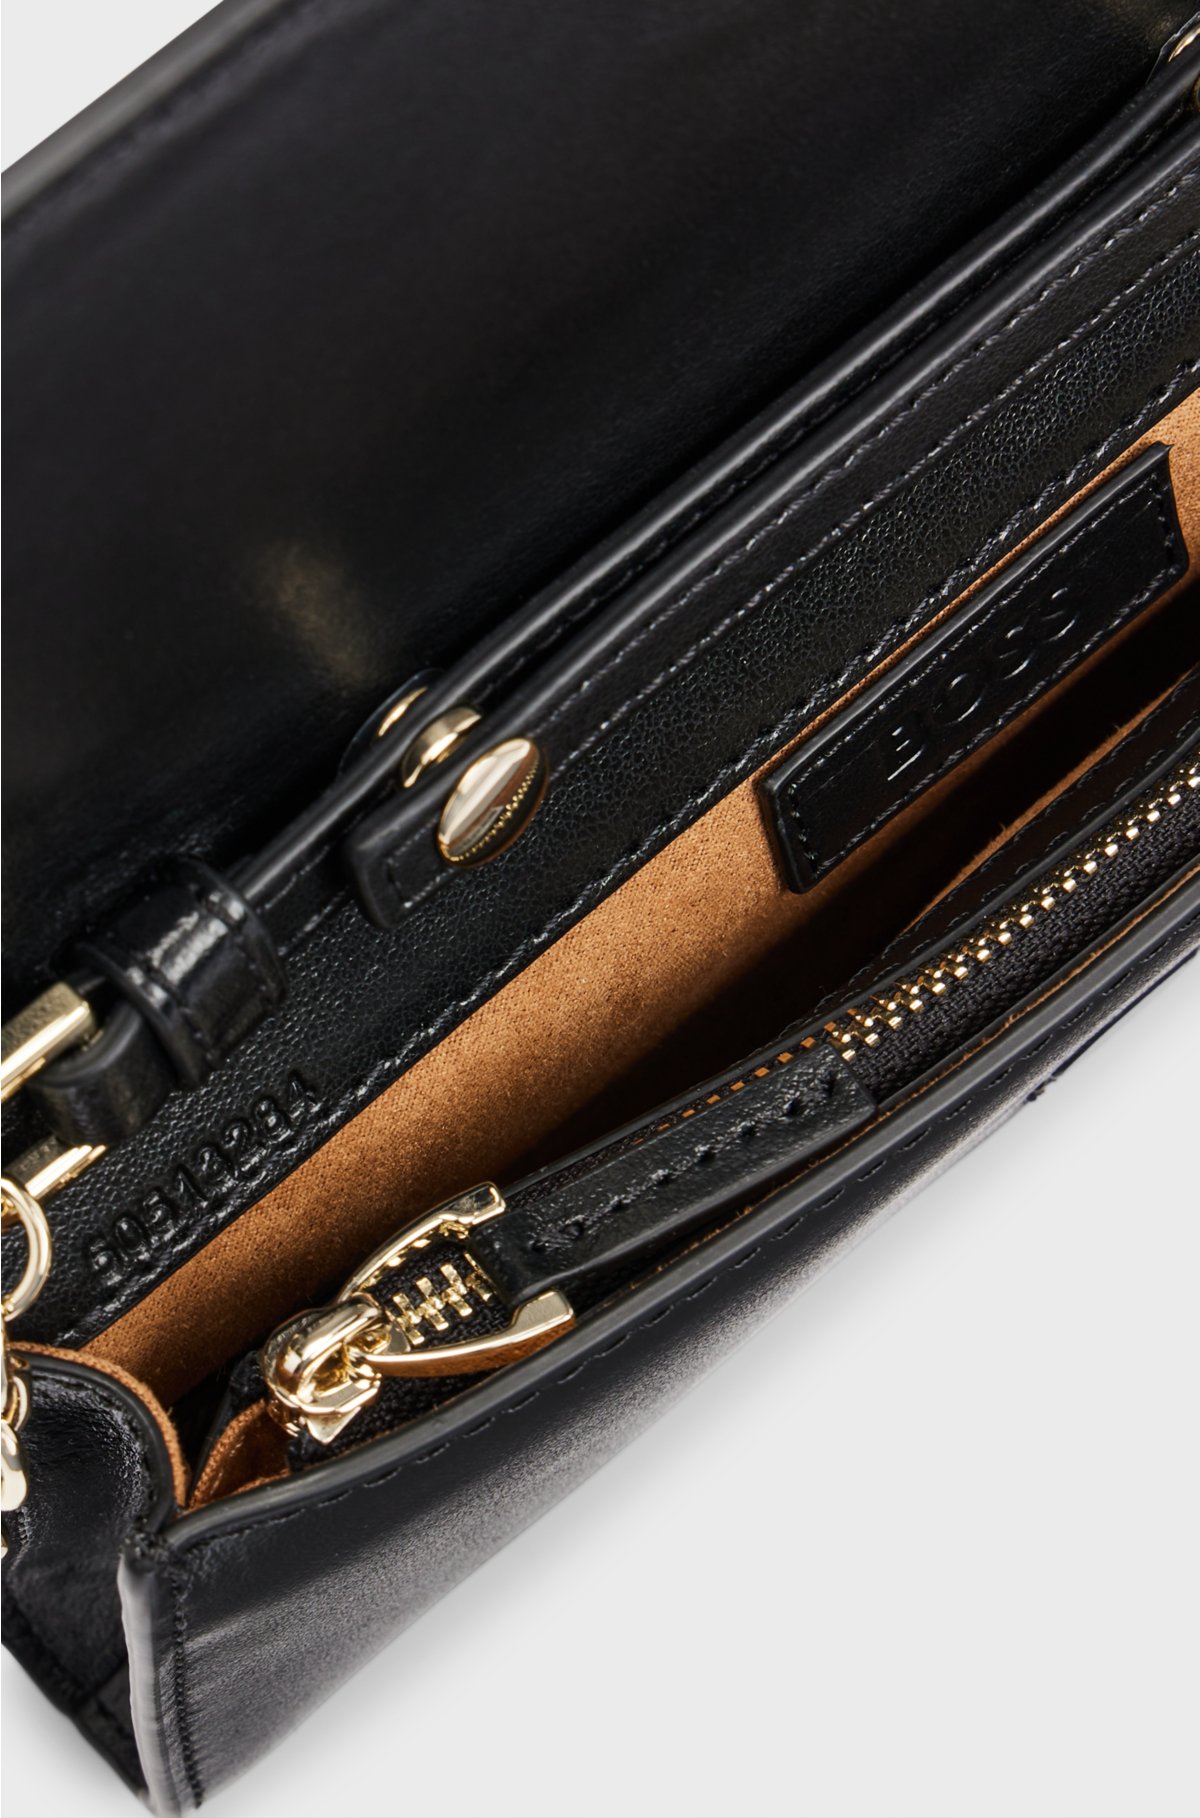 Leather clutch bag with branded hardware, Black